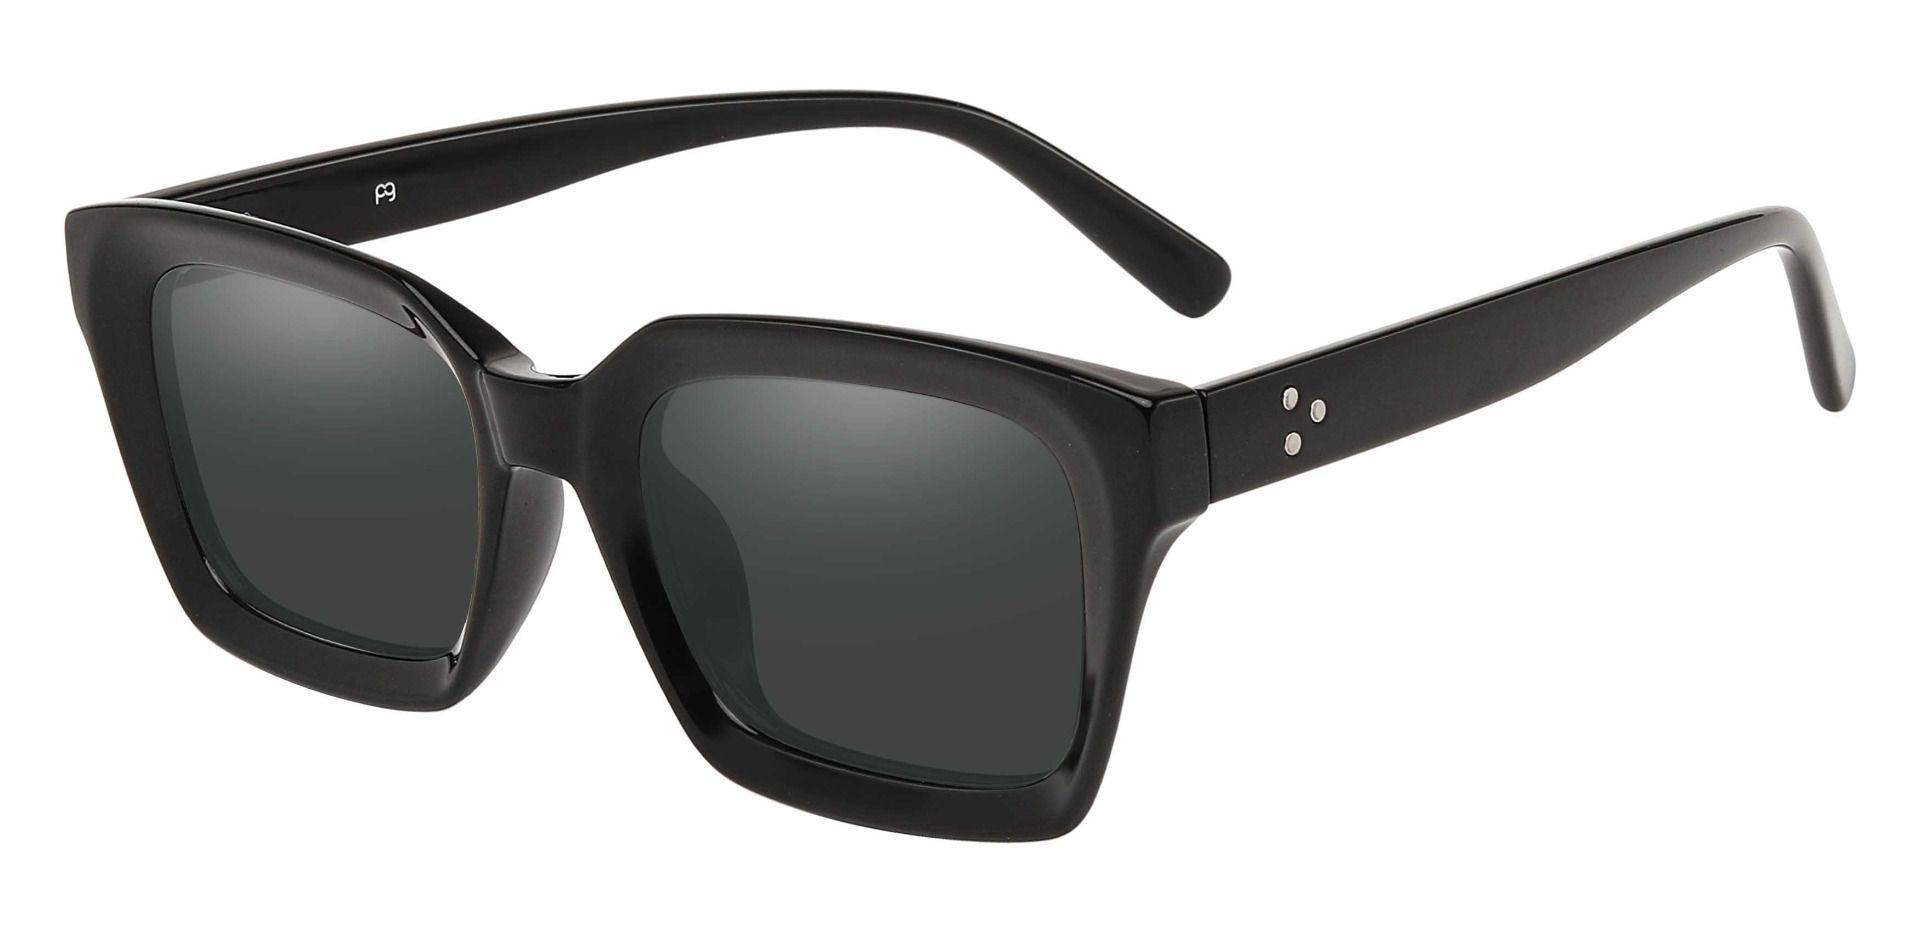 Unity Rectangle Lined Bifocal Sunglasses - Black Frame With Gray Lenses